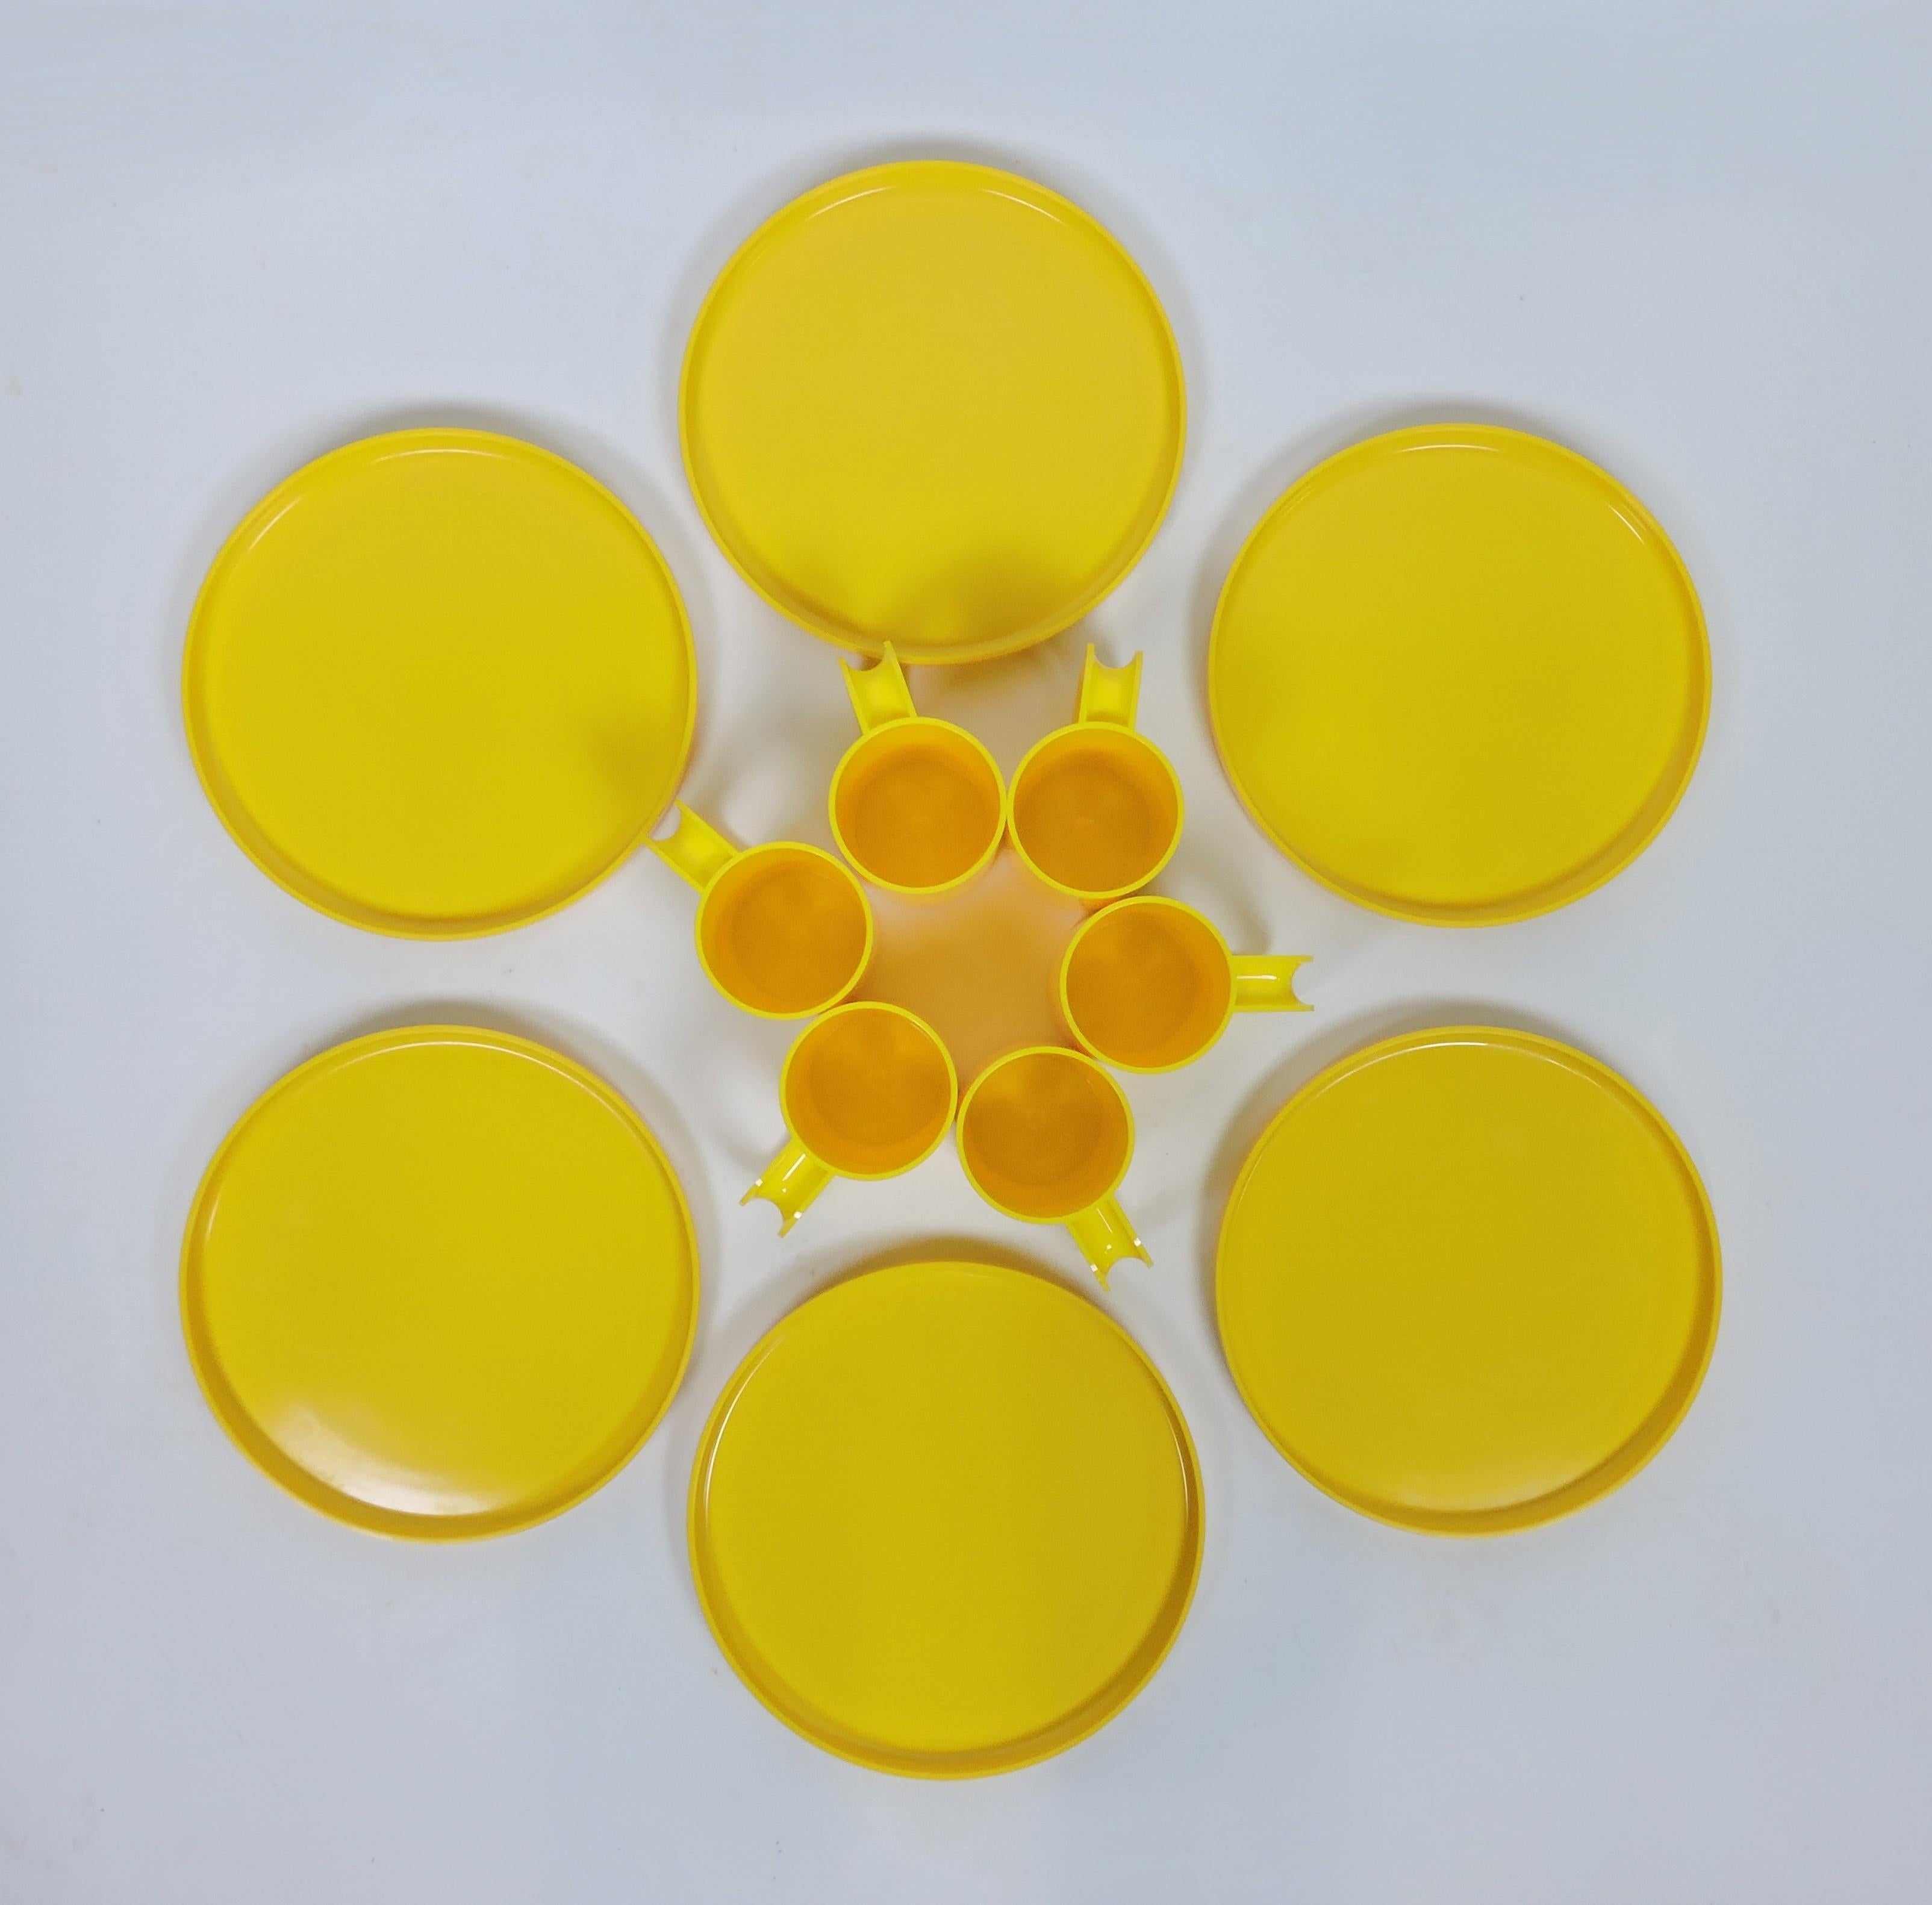 Iconic sixties design by Massimo and Lella Vignelli of stacking plates and mugs manufactured by Heller. This set consists of 6 dinner plates and 6 mugs in a sunshine yellow color. All of the mugs and one plate are stamped with the Heller label.